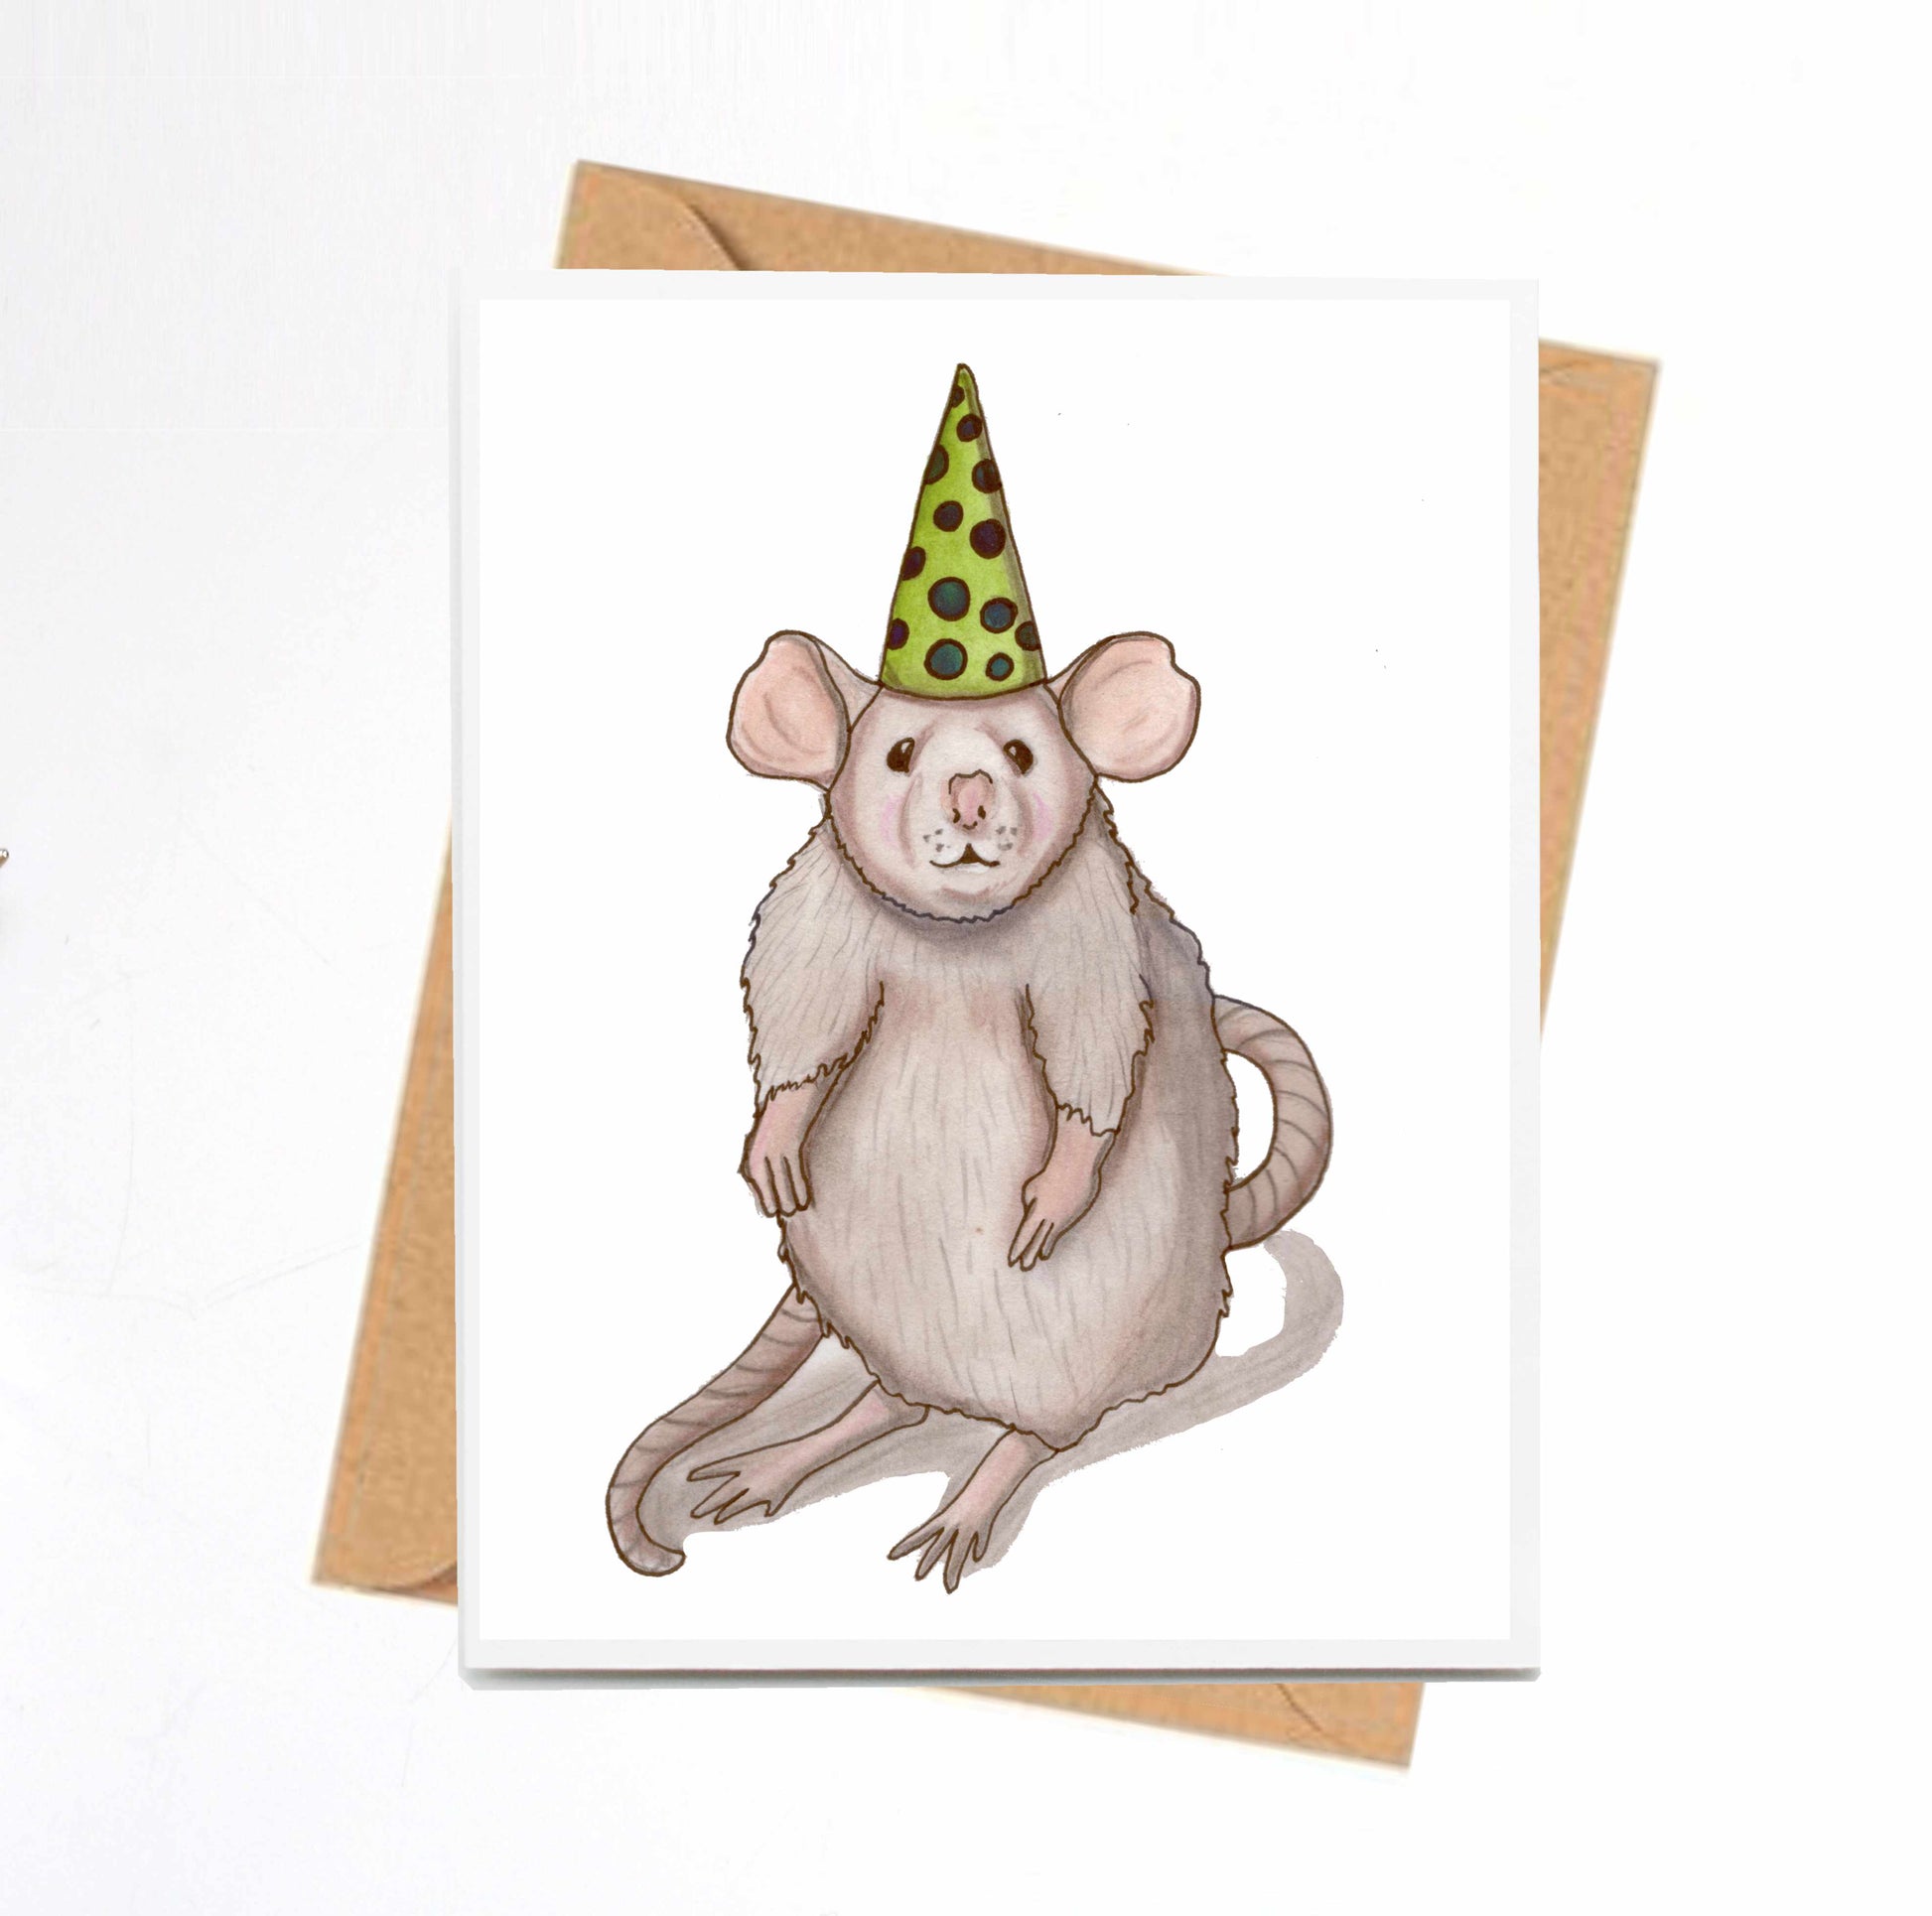 PinkPolish Design Note Cards "Field Mouse Celebration" Handmade Notecard